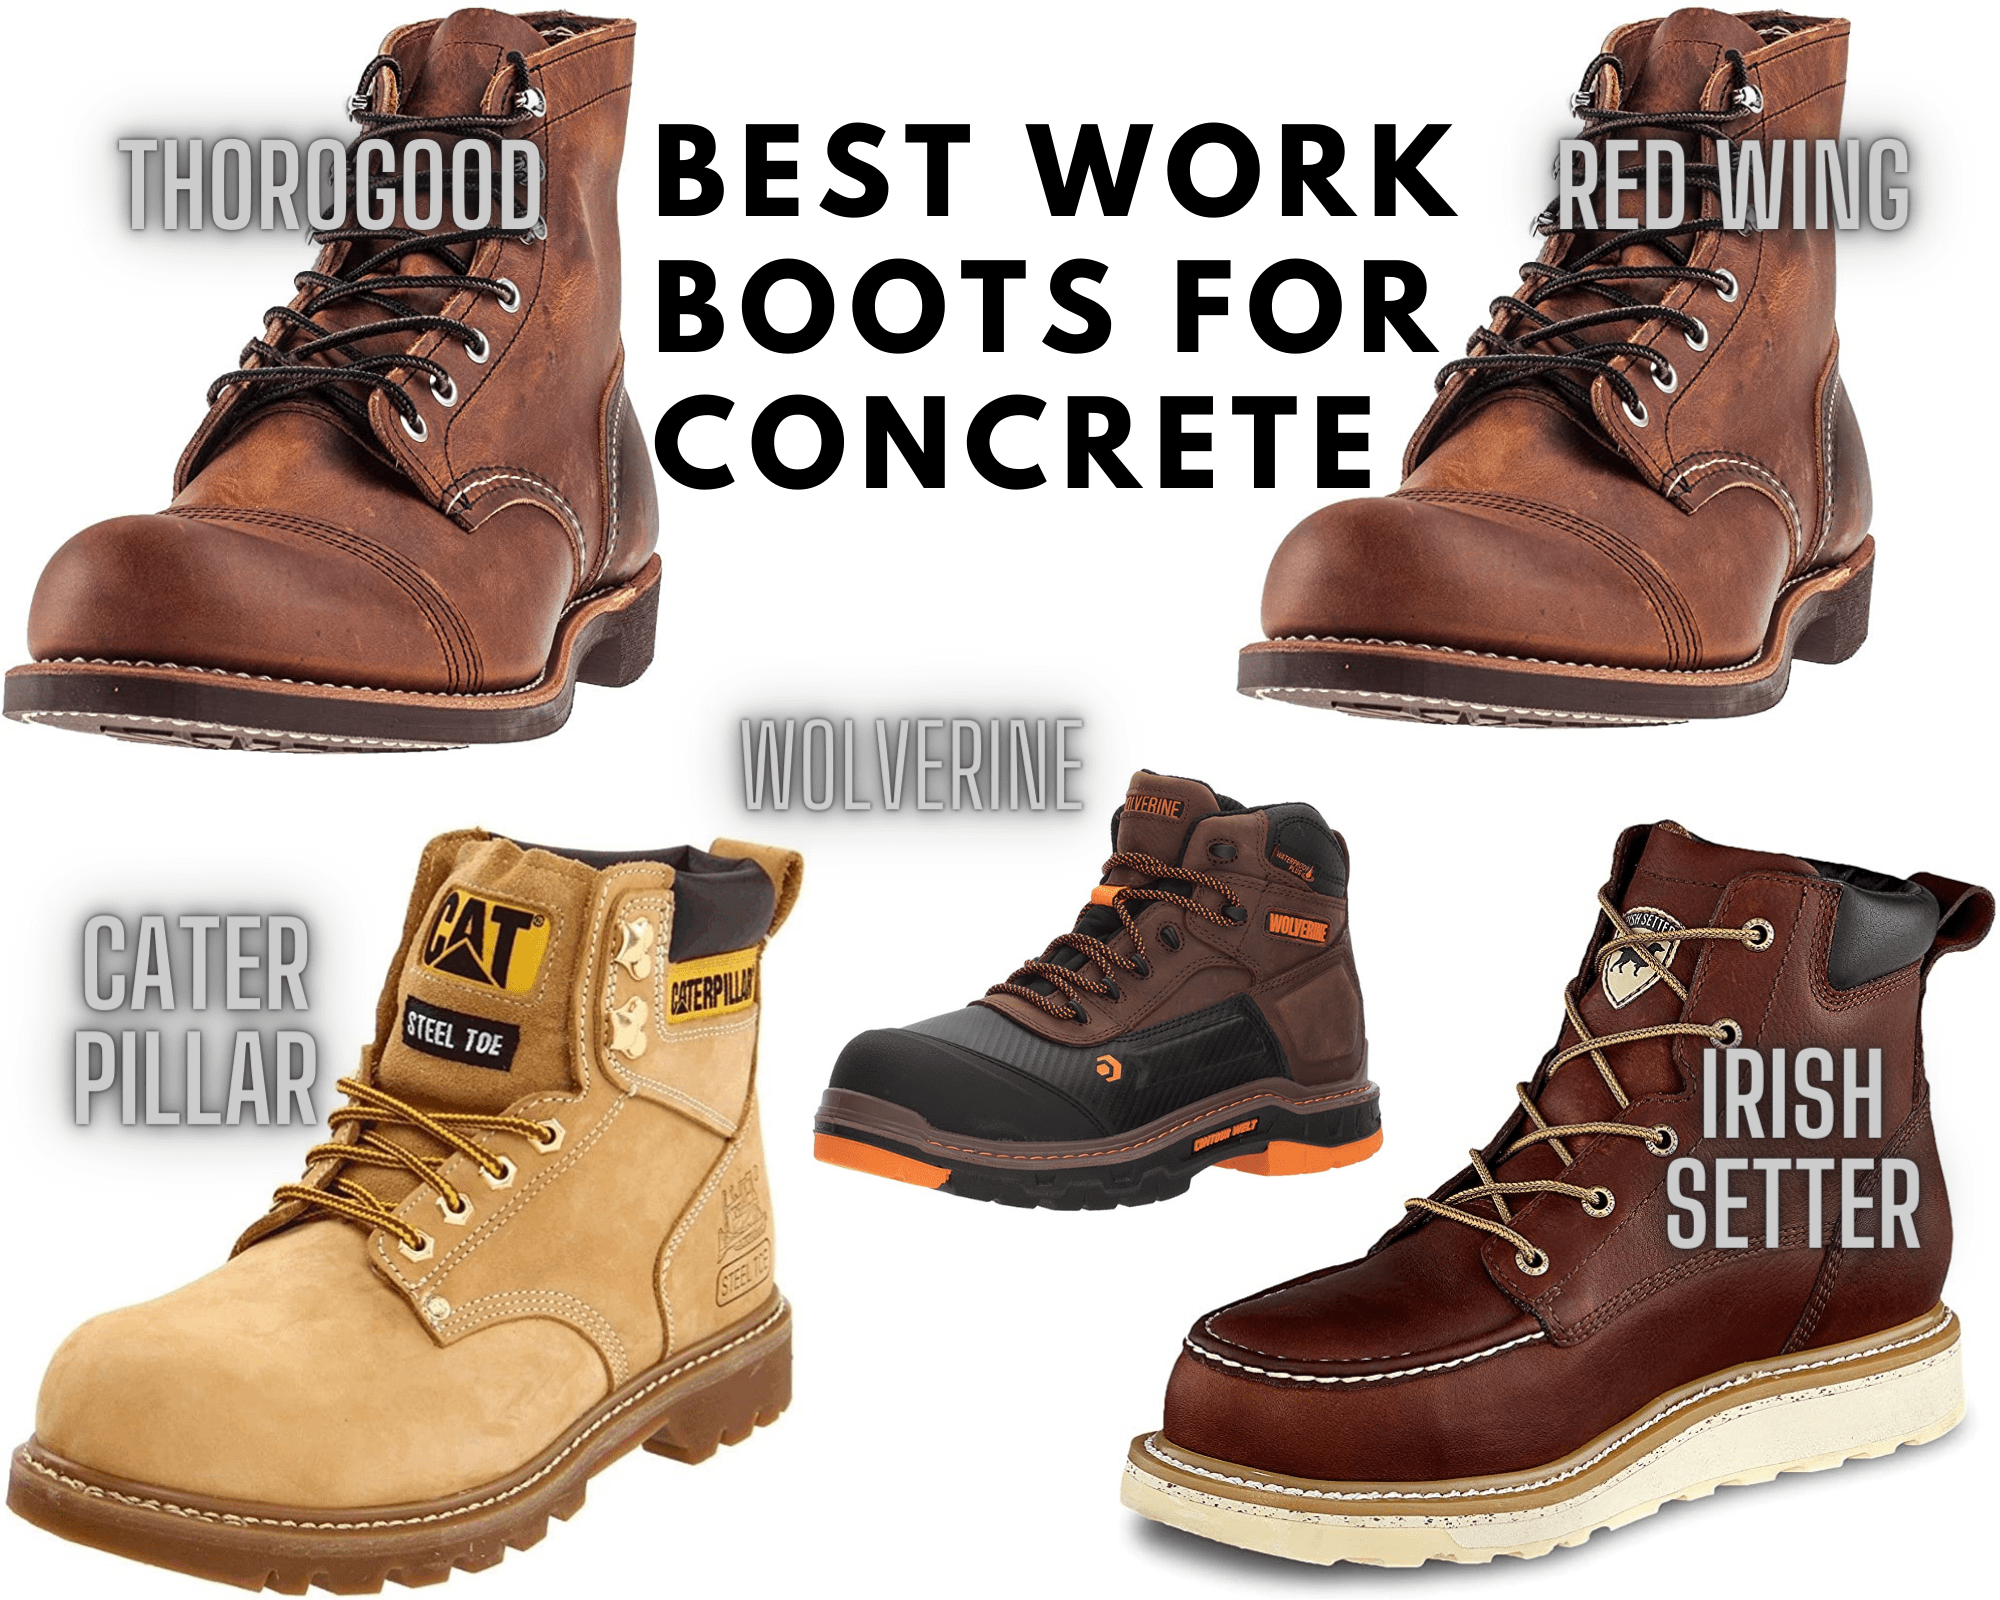 Best work boots for concrete